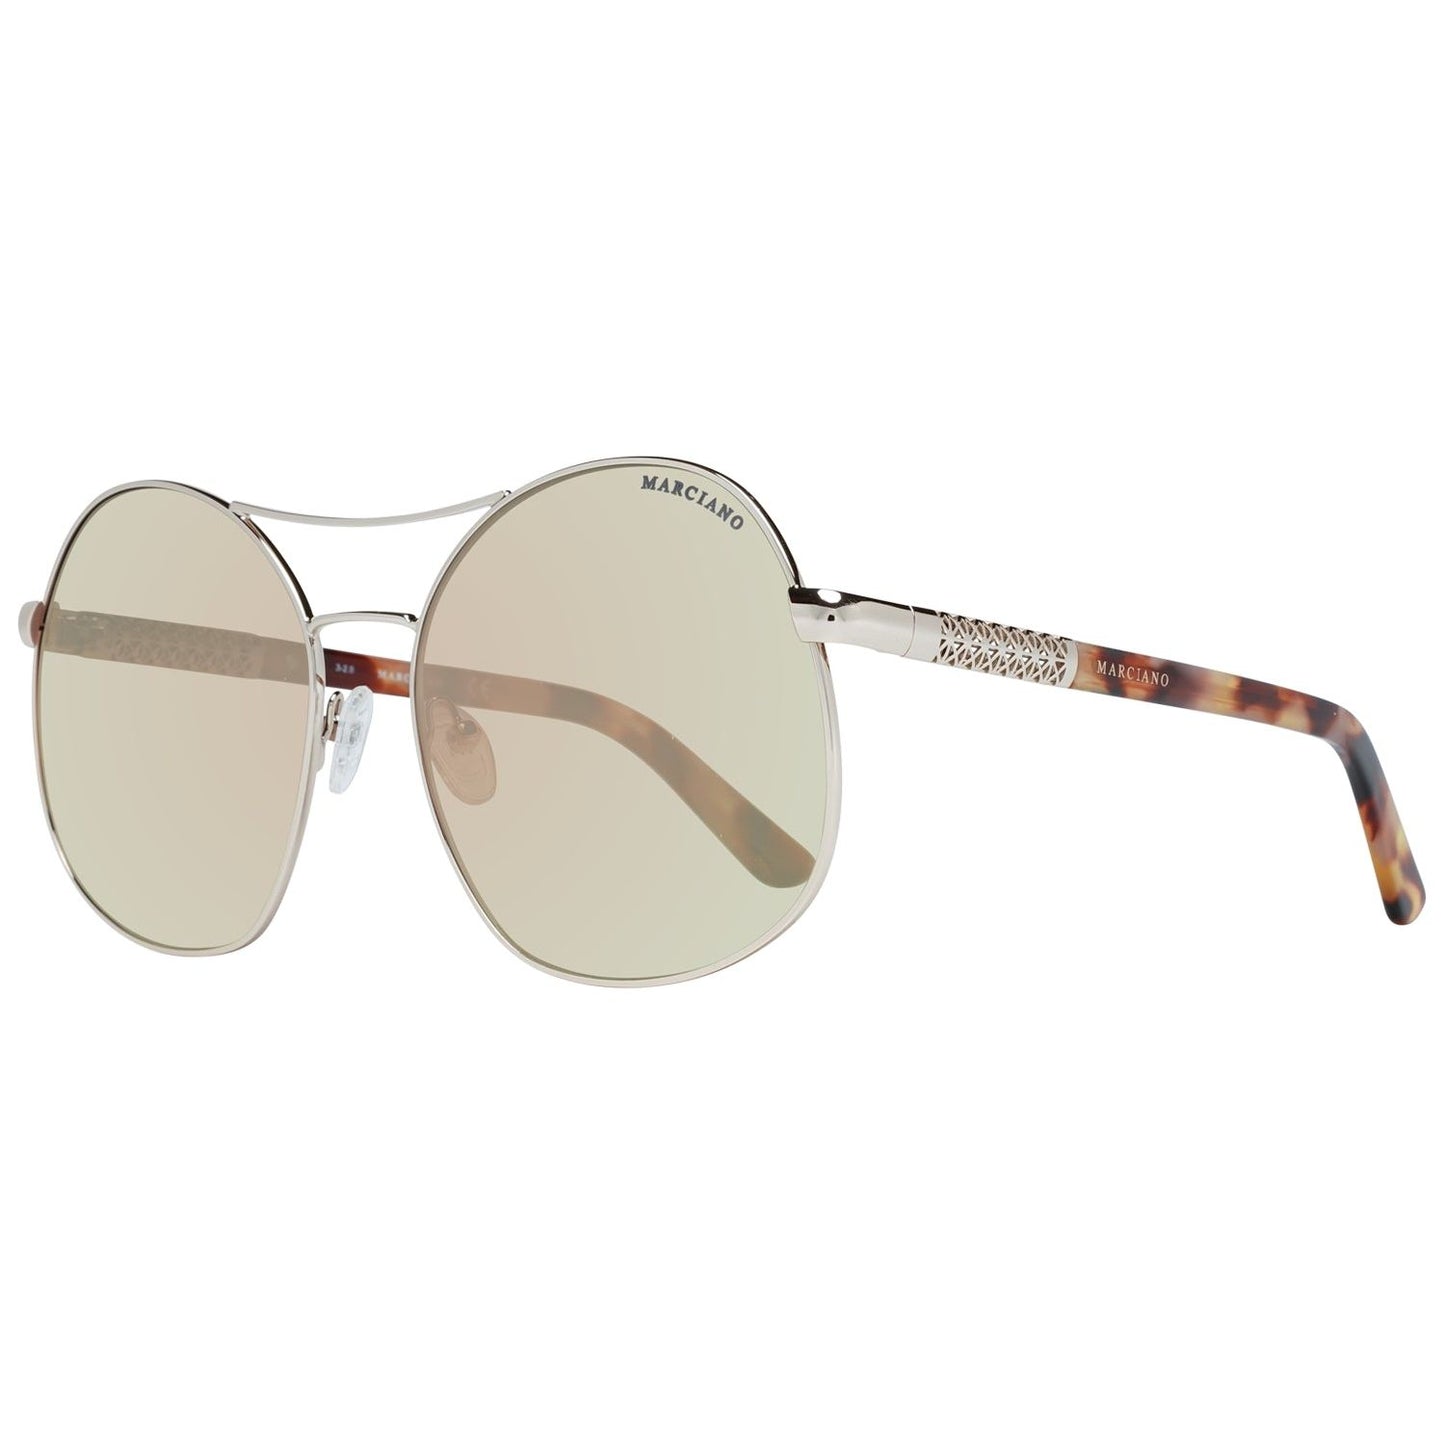 MARCIANO By GUESS SUNGLASSES MARCIANO BY GUESS MOD. GM0807 6232B SUNGLASSES & EYEWEAR marciano-by-guess-mod-gm0807-6232b